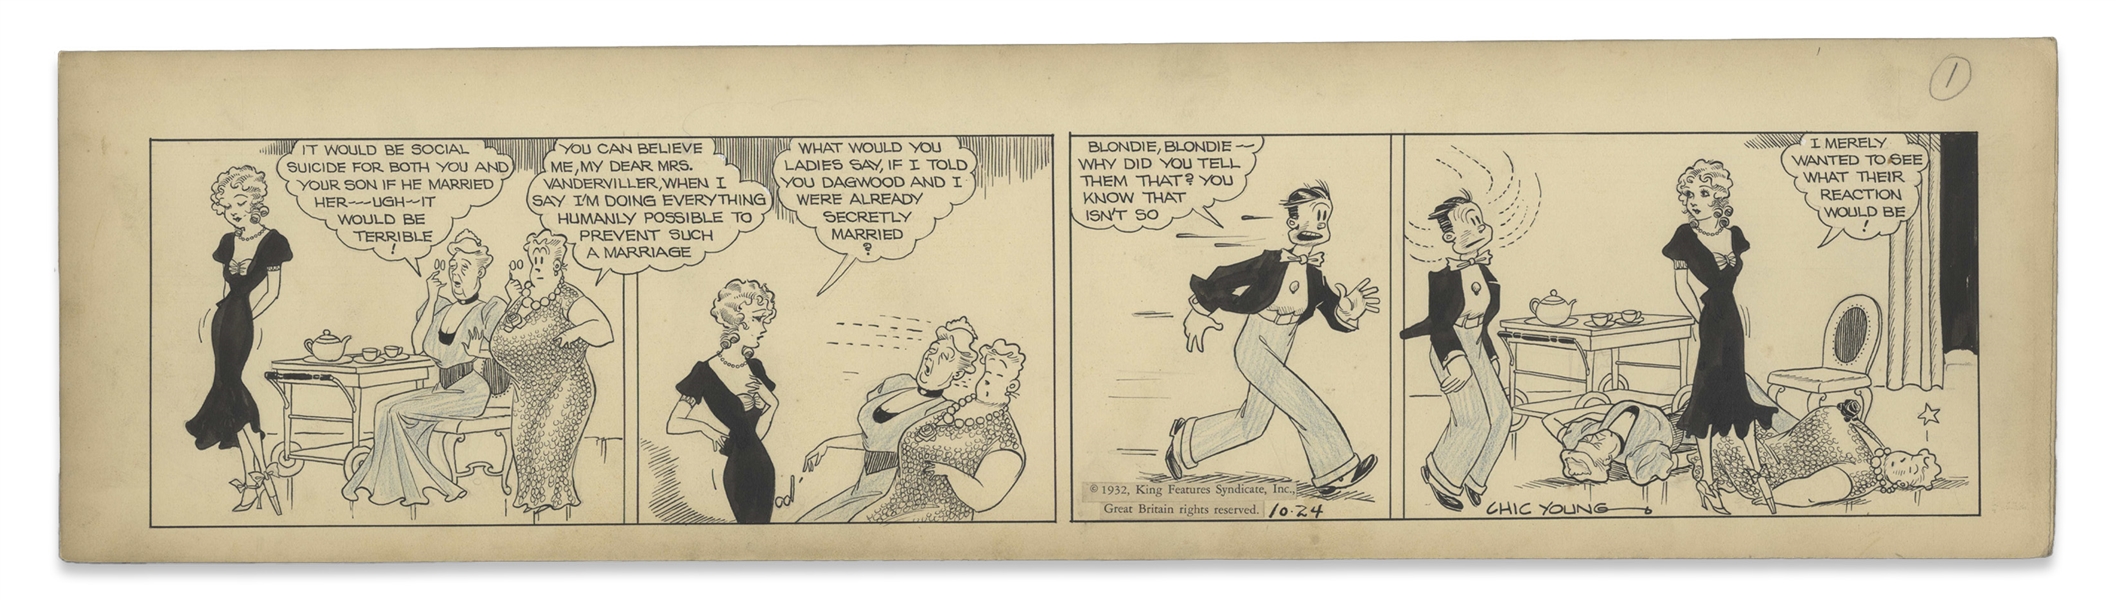 Chic Young Hand-Drawn ''Blondie'' Comic Strip From 1932 Titled ''For the Count of Nine'' -- Blondie Plays a Practical Joke on Dagwood's Mother